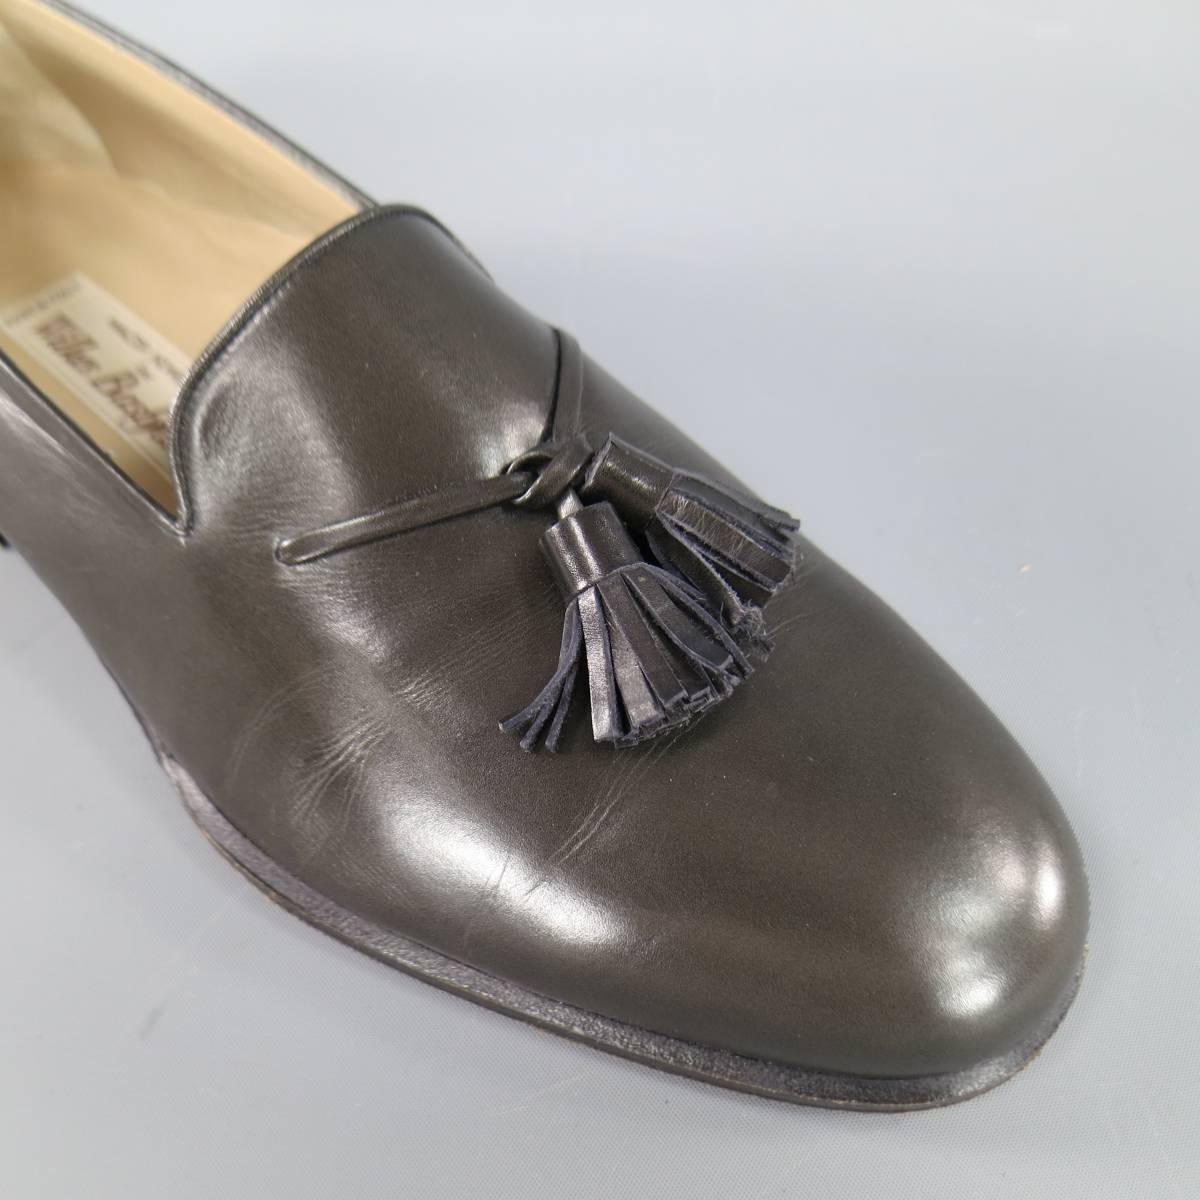 These vintage GRAVATI loafers come in a smooth charcoal grey leather with a clean, seamless design and double tassel detail. With box. Made in Italy.
 
Excellent Pre-Owned Condition.
Marked: 8 1/2 M
 
11 in X 4 in.
